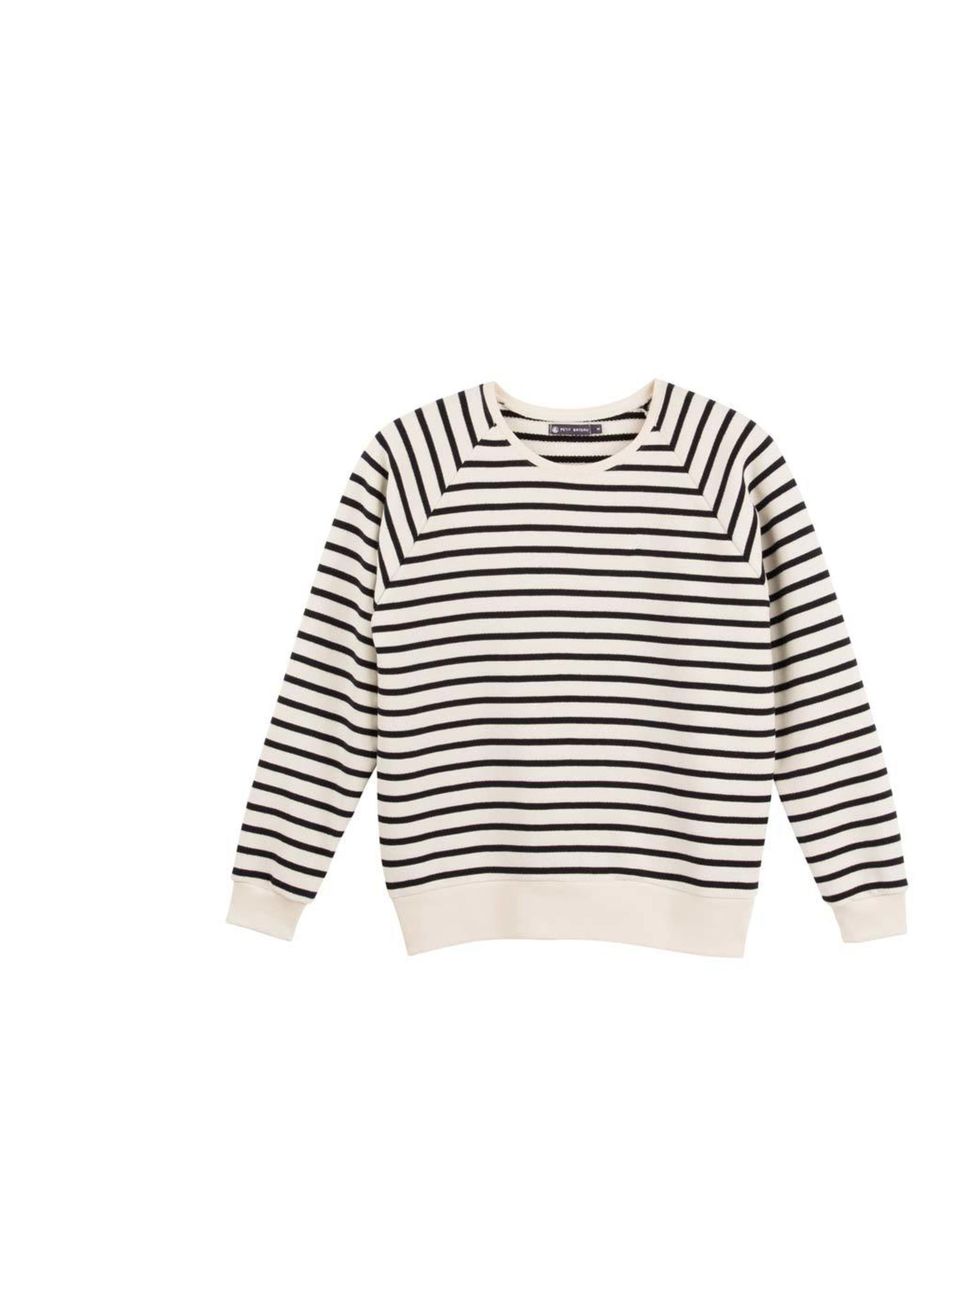 <p>Designer Phoebe Sing will pair this simple breton with an a-line skirt and lace-up ankle boots.</p><p><a href="http://www.petit-bateau.co.uk/e-shop/product/34295/4N9/women-s-sailor-striped-sweatshirt-in-brushed-fleece.html">Petit Bateau</a> sweatshirt,